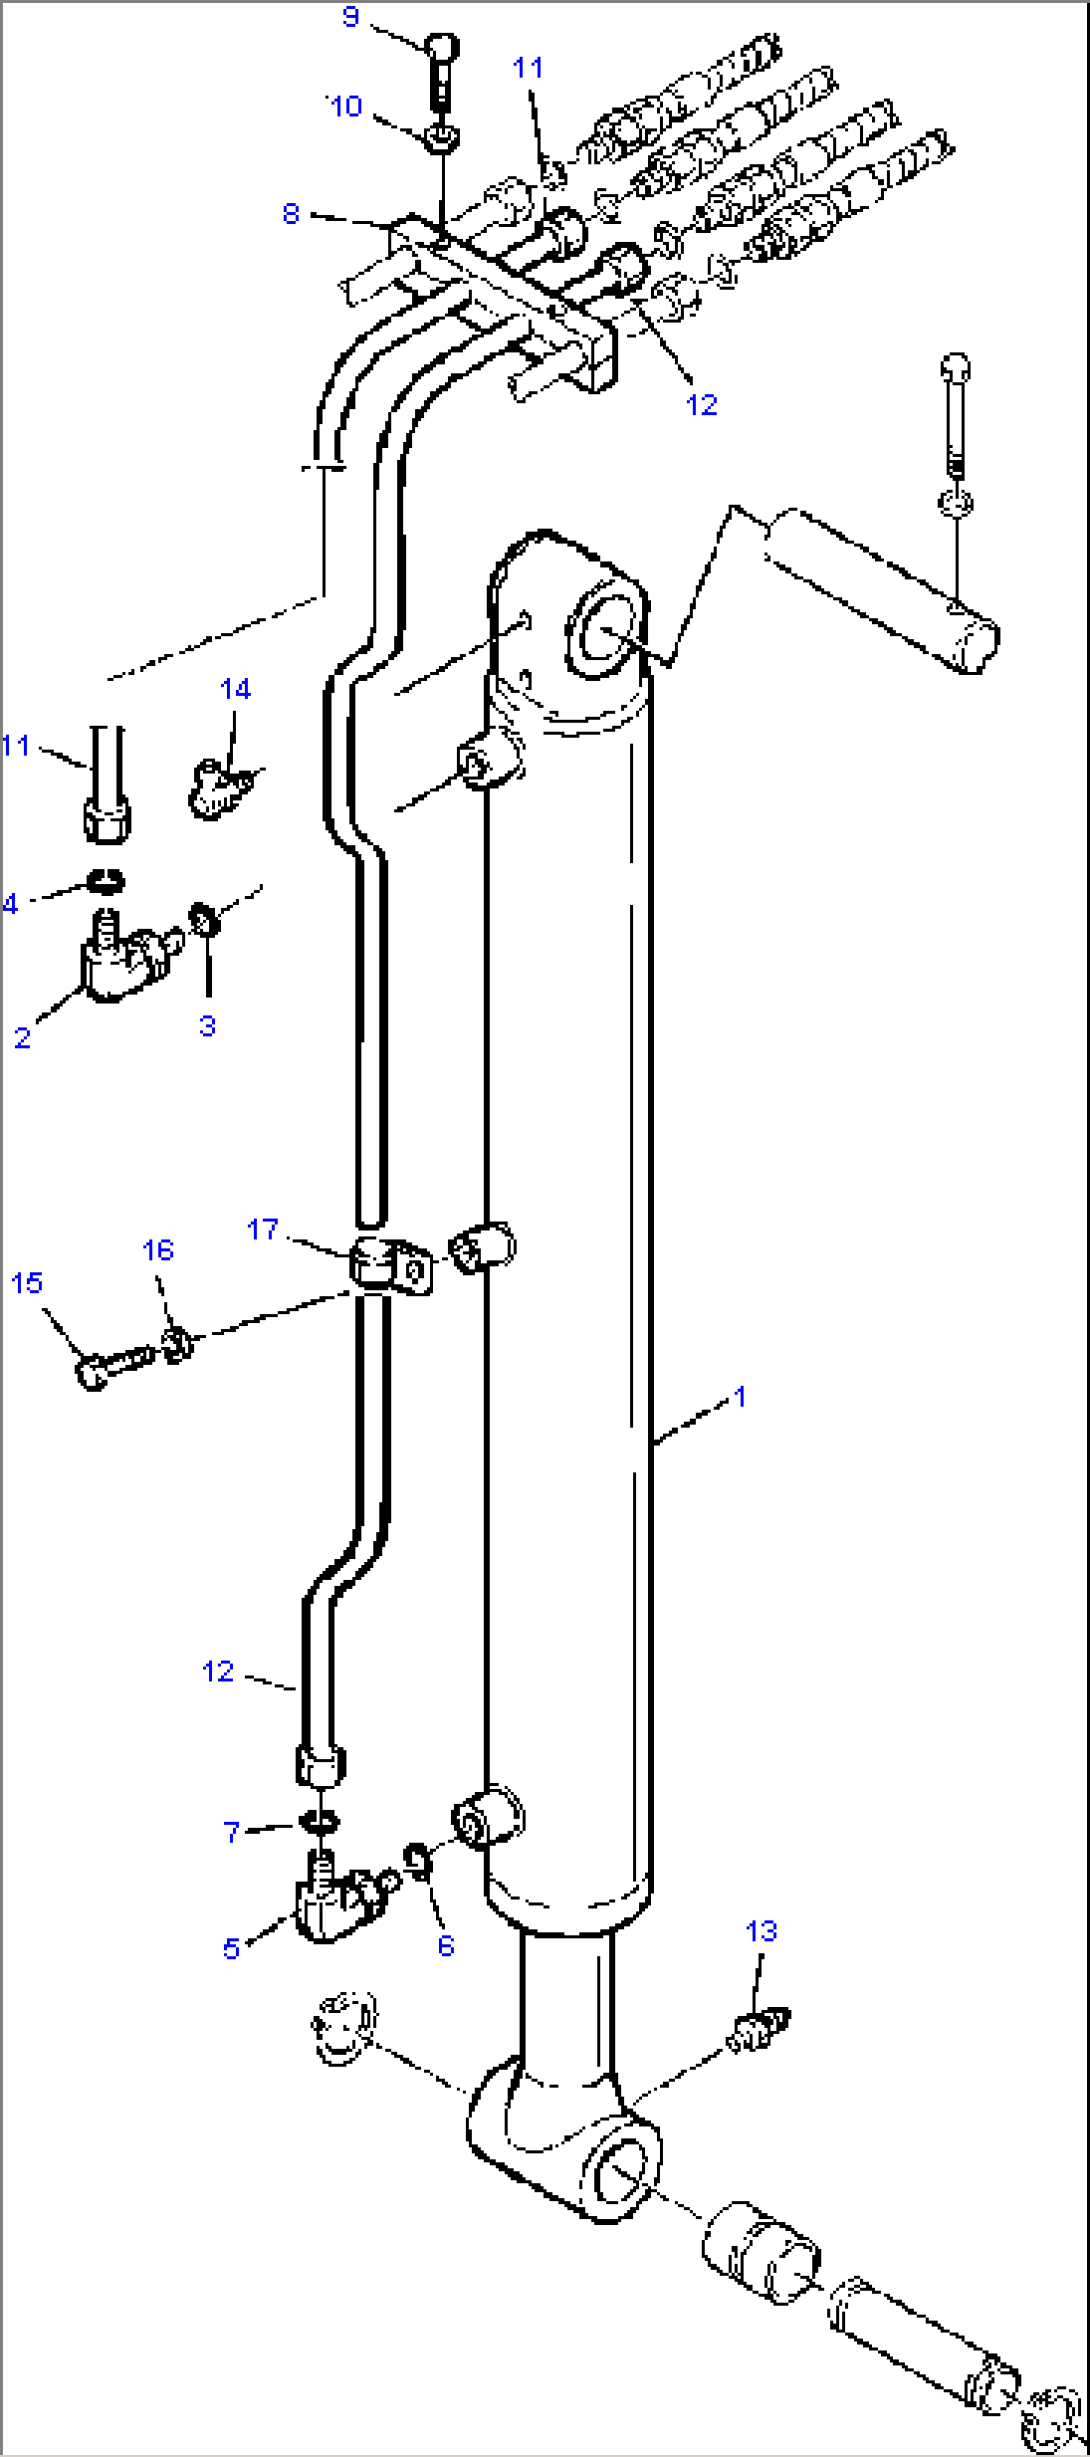 FIG. H7360-01A0 JIG ARM CYLINDER PIPING